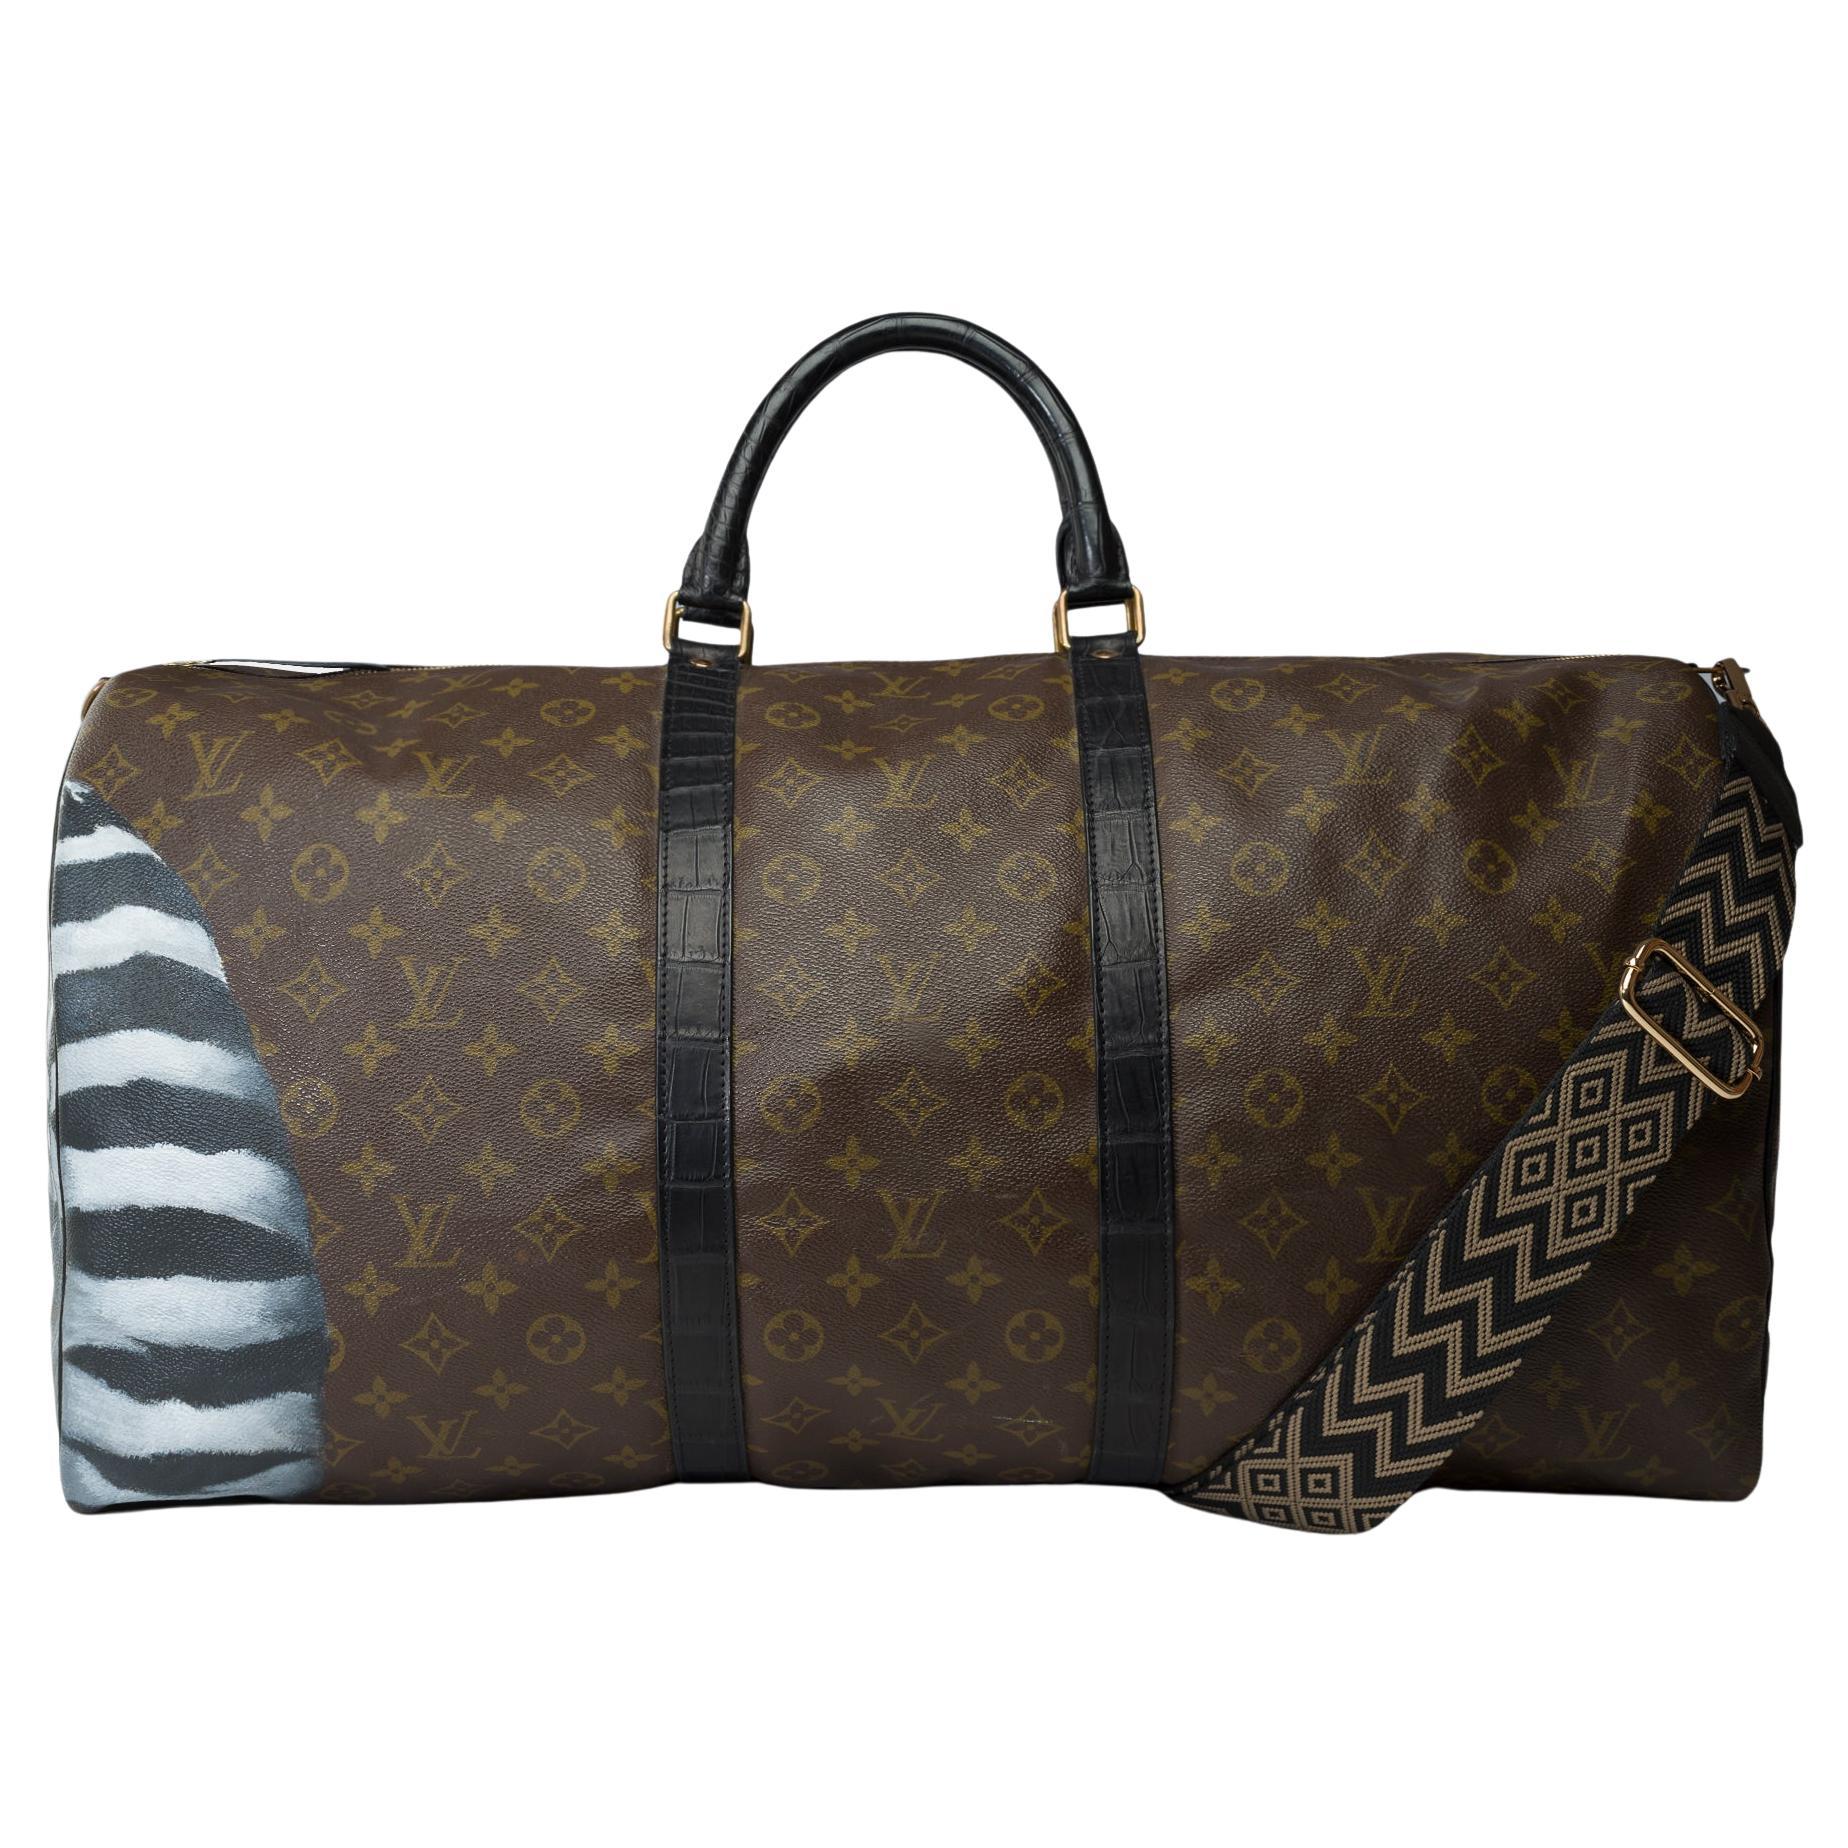 Customized Louis Vuitton Keepall 60 strap Travel bag with Black Crocodile For Sale